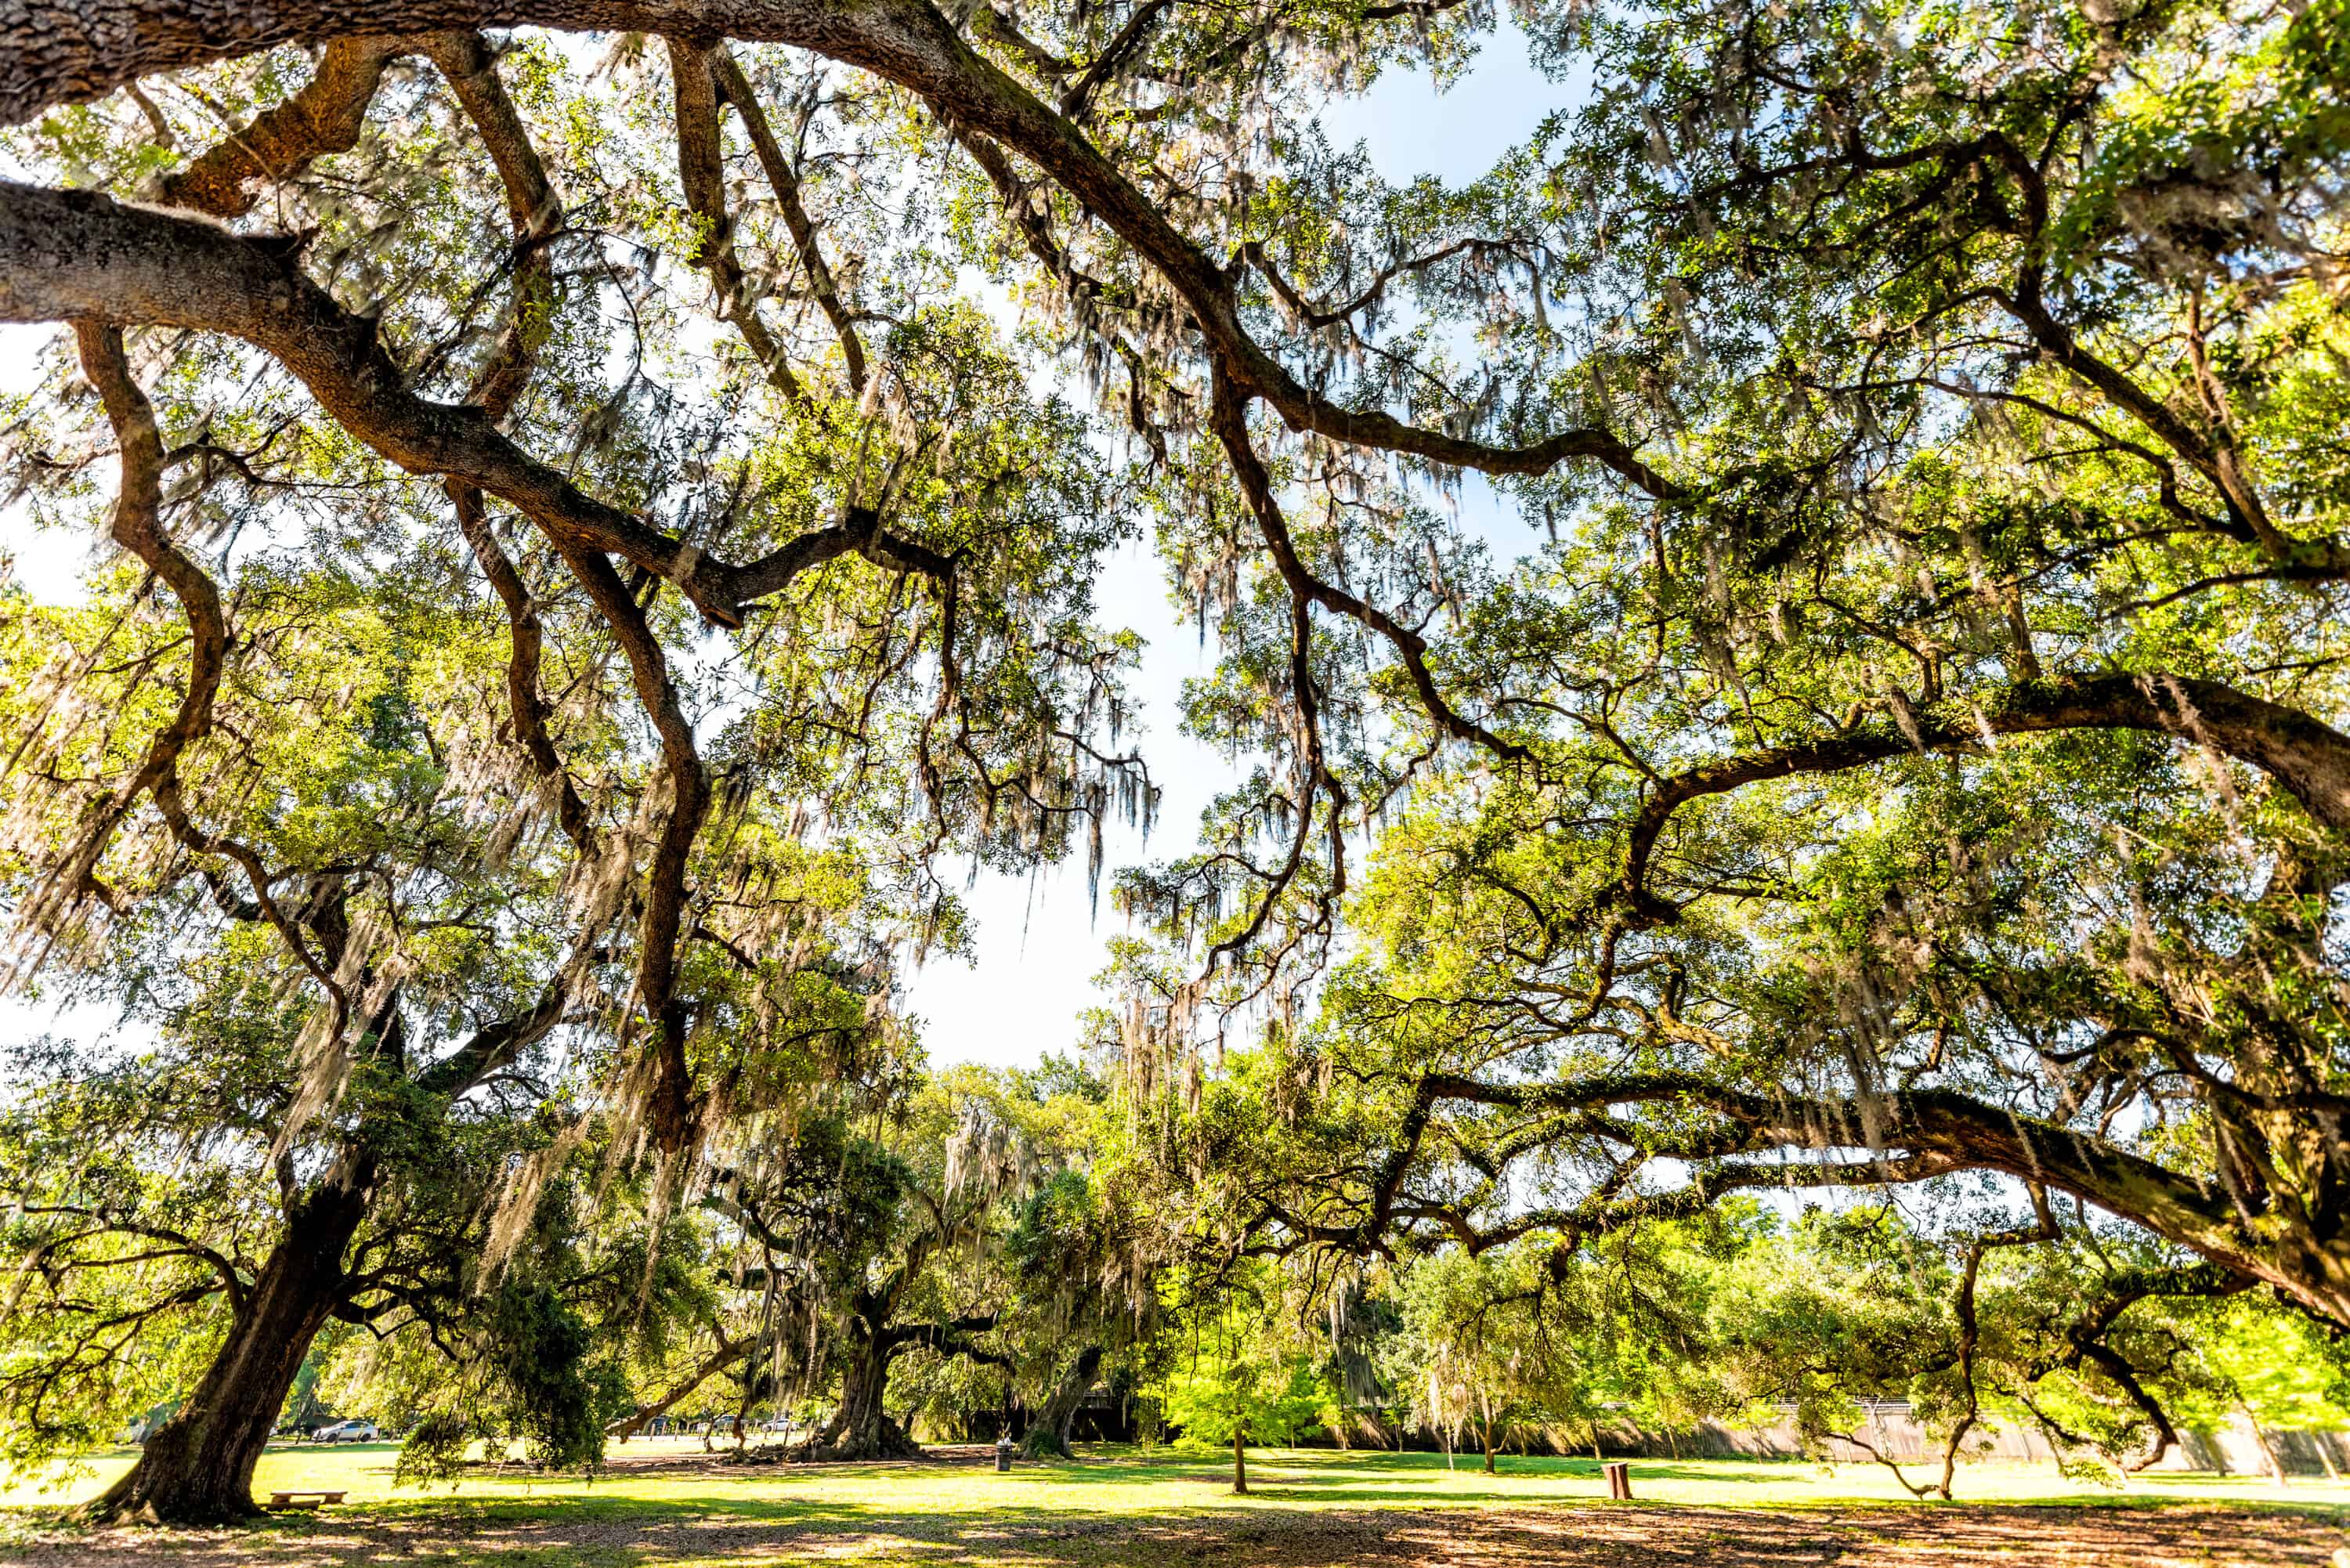 Old southern live oak trees in New Orleans Audubon park on sunny spring day with benches and hanging spanish moss and green